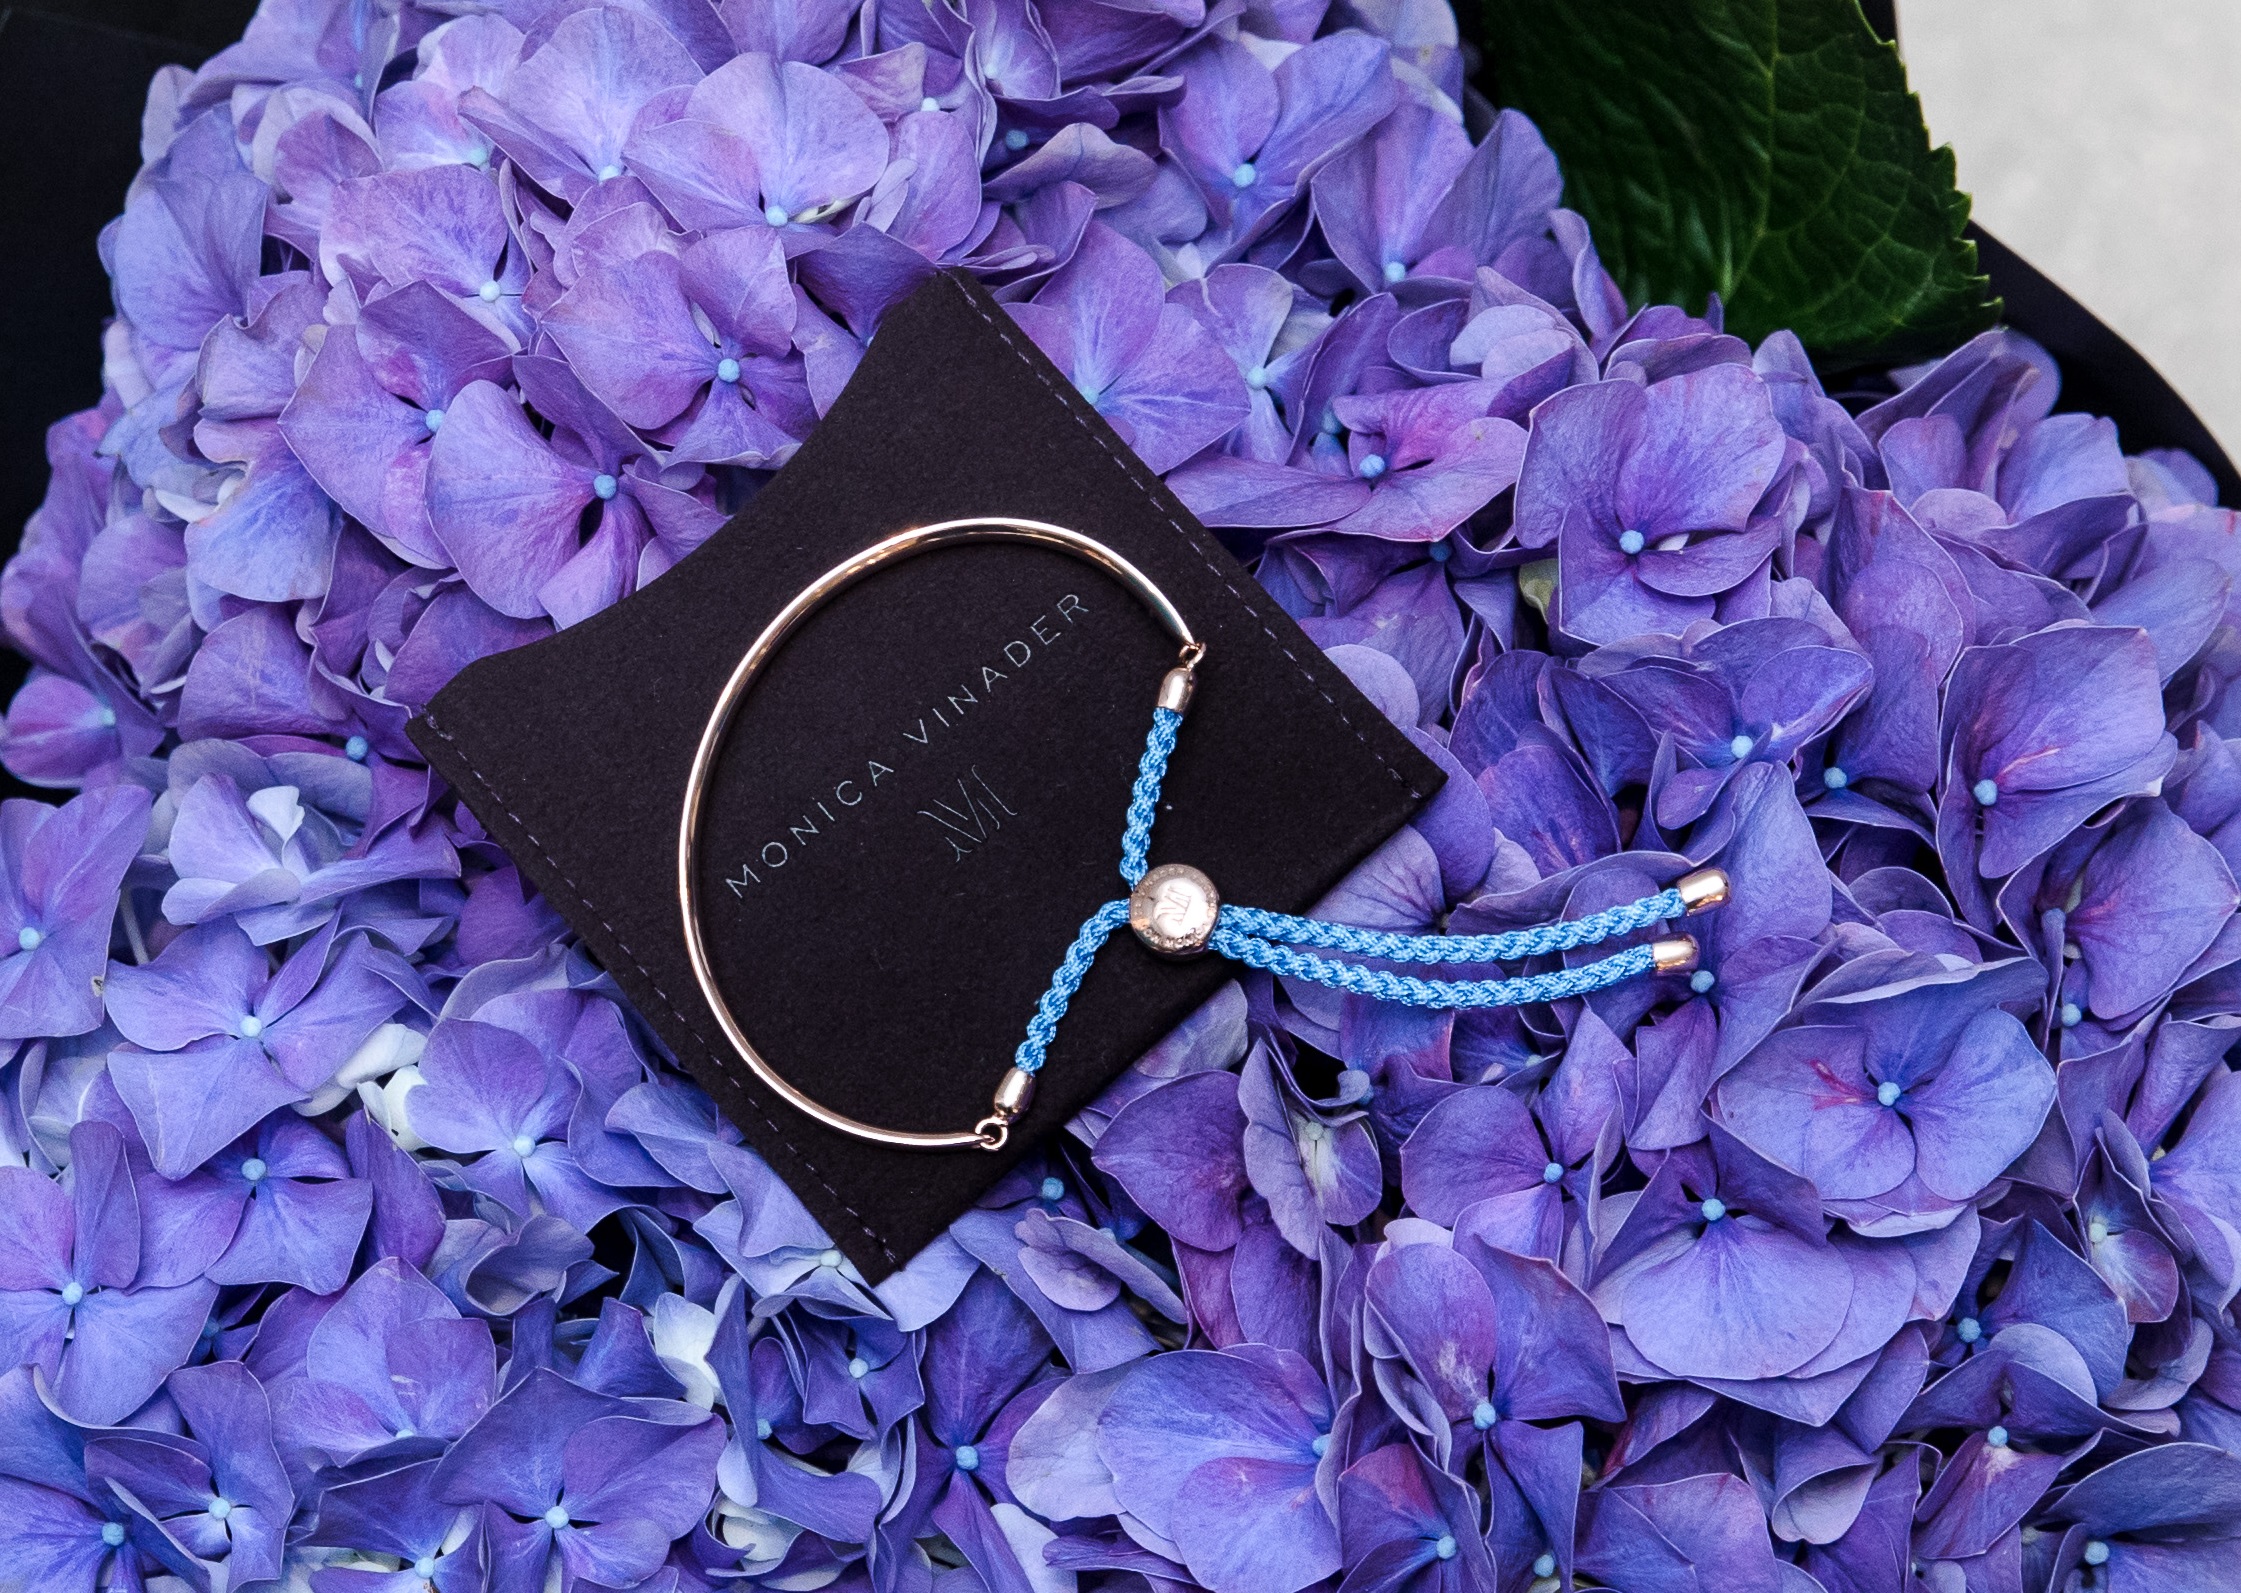 Hydrangeas and jewellery are the perfect combination